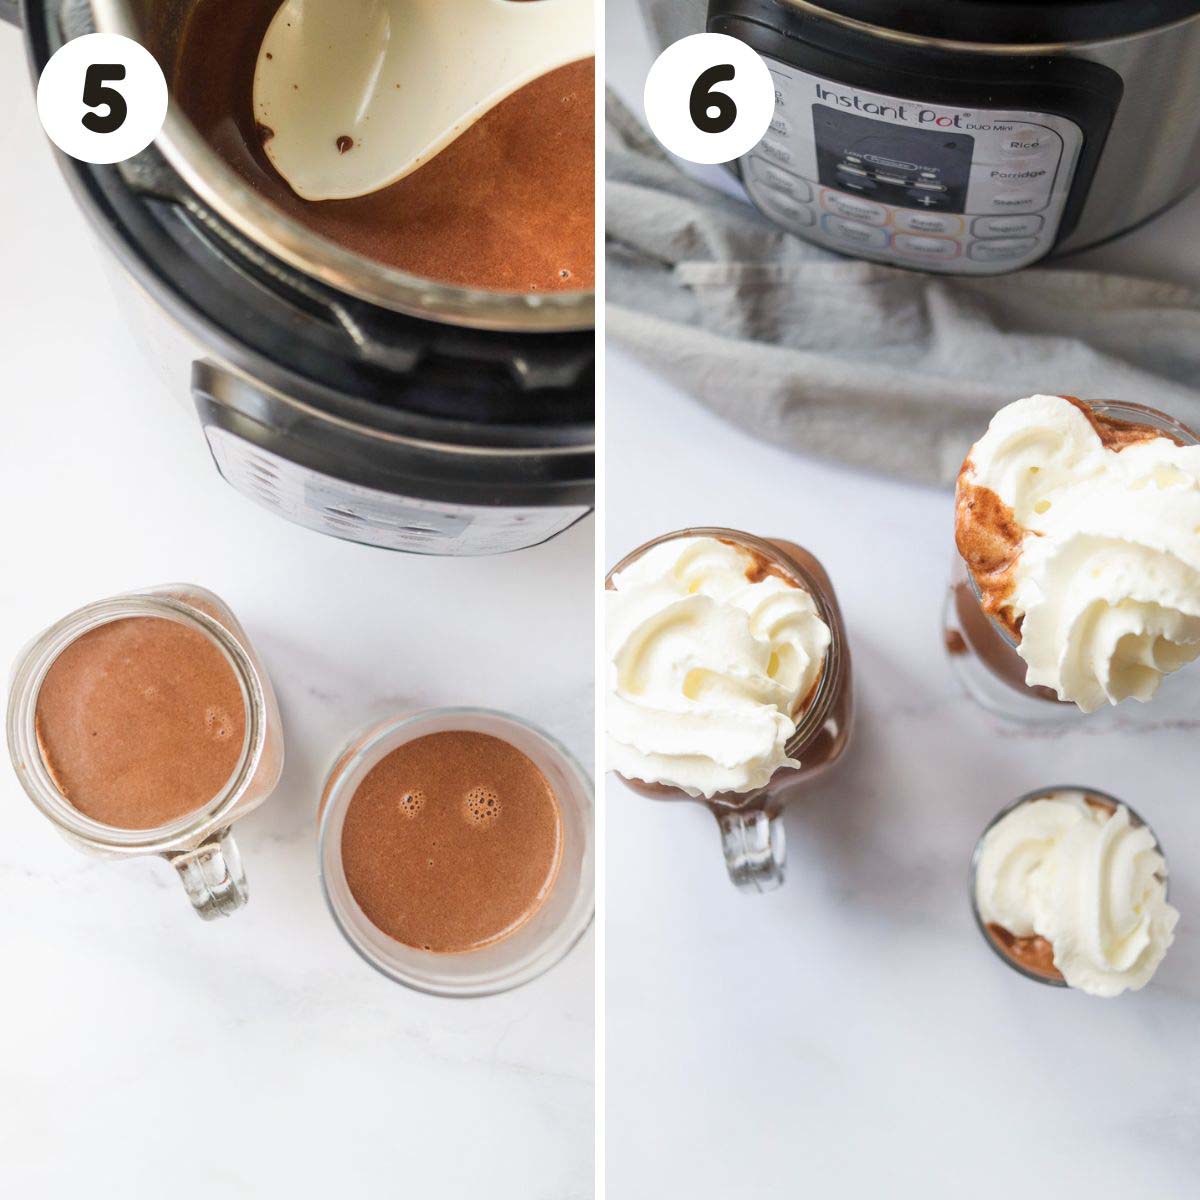 Steps to serve the hot chocolate.